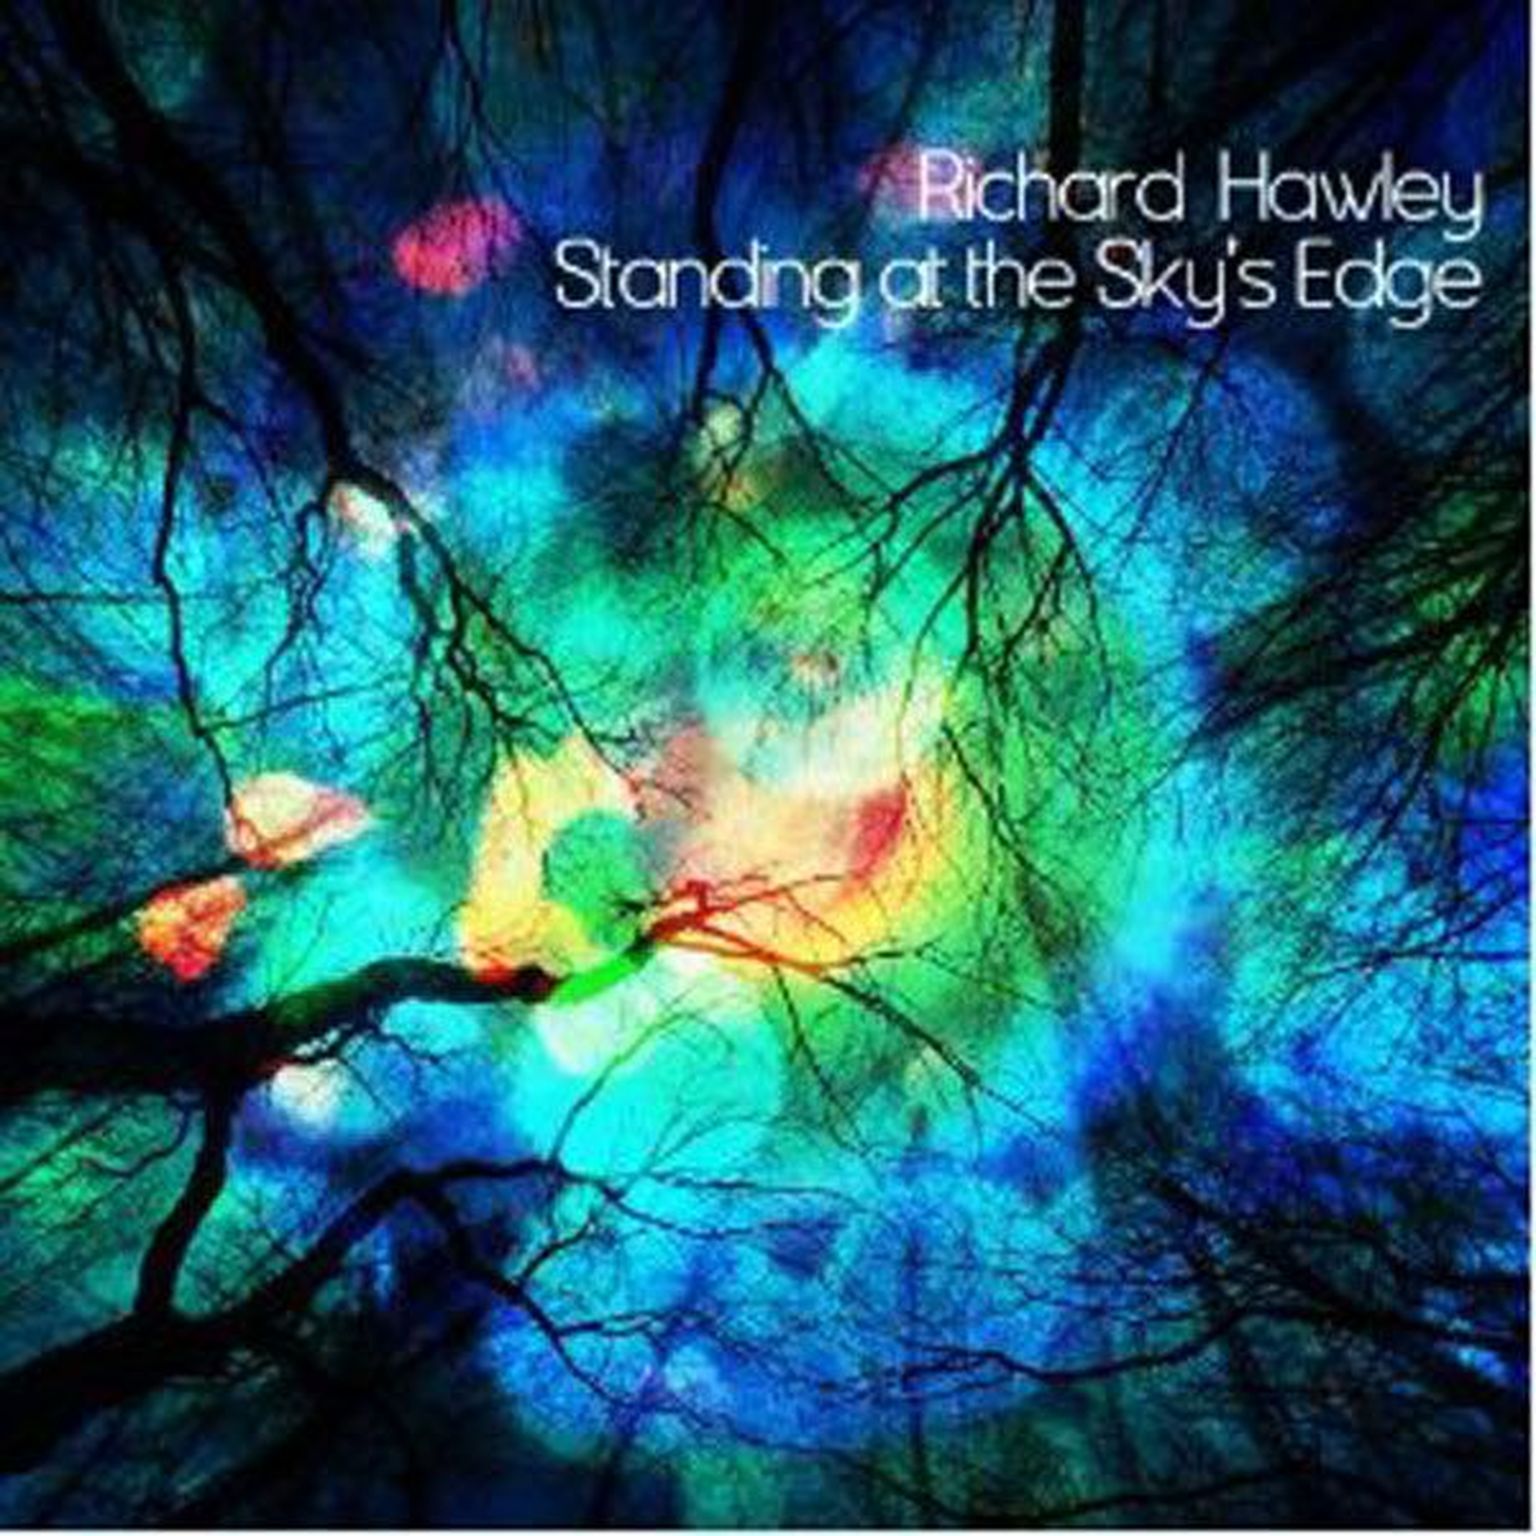 Richard Hawley
Standing At 
The Sky’s Edge 
(Parlophone)